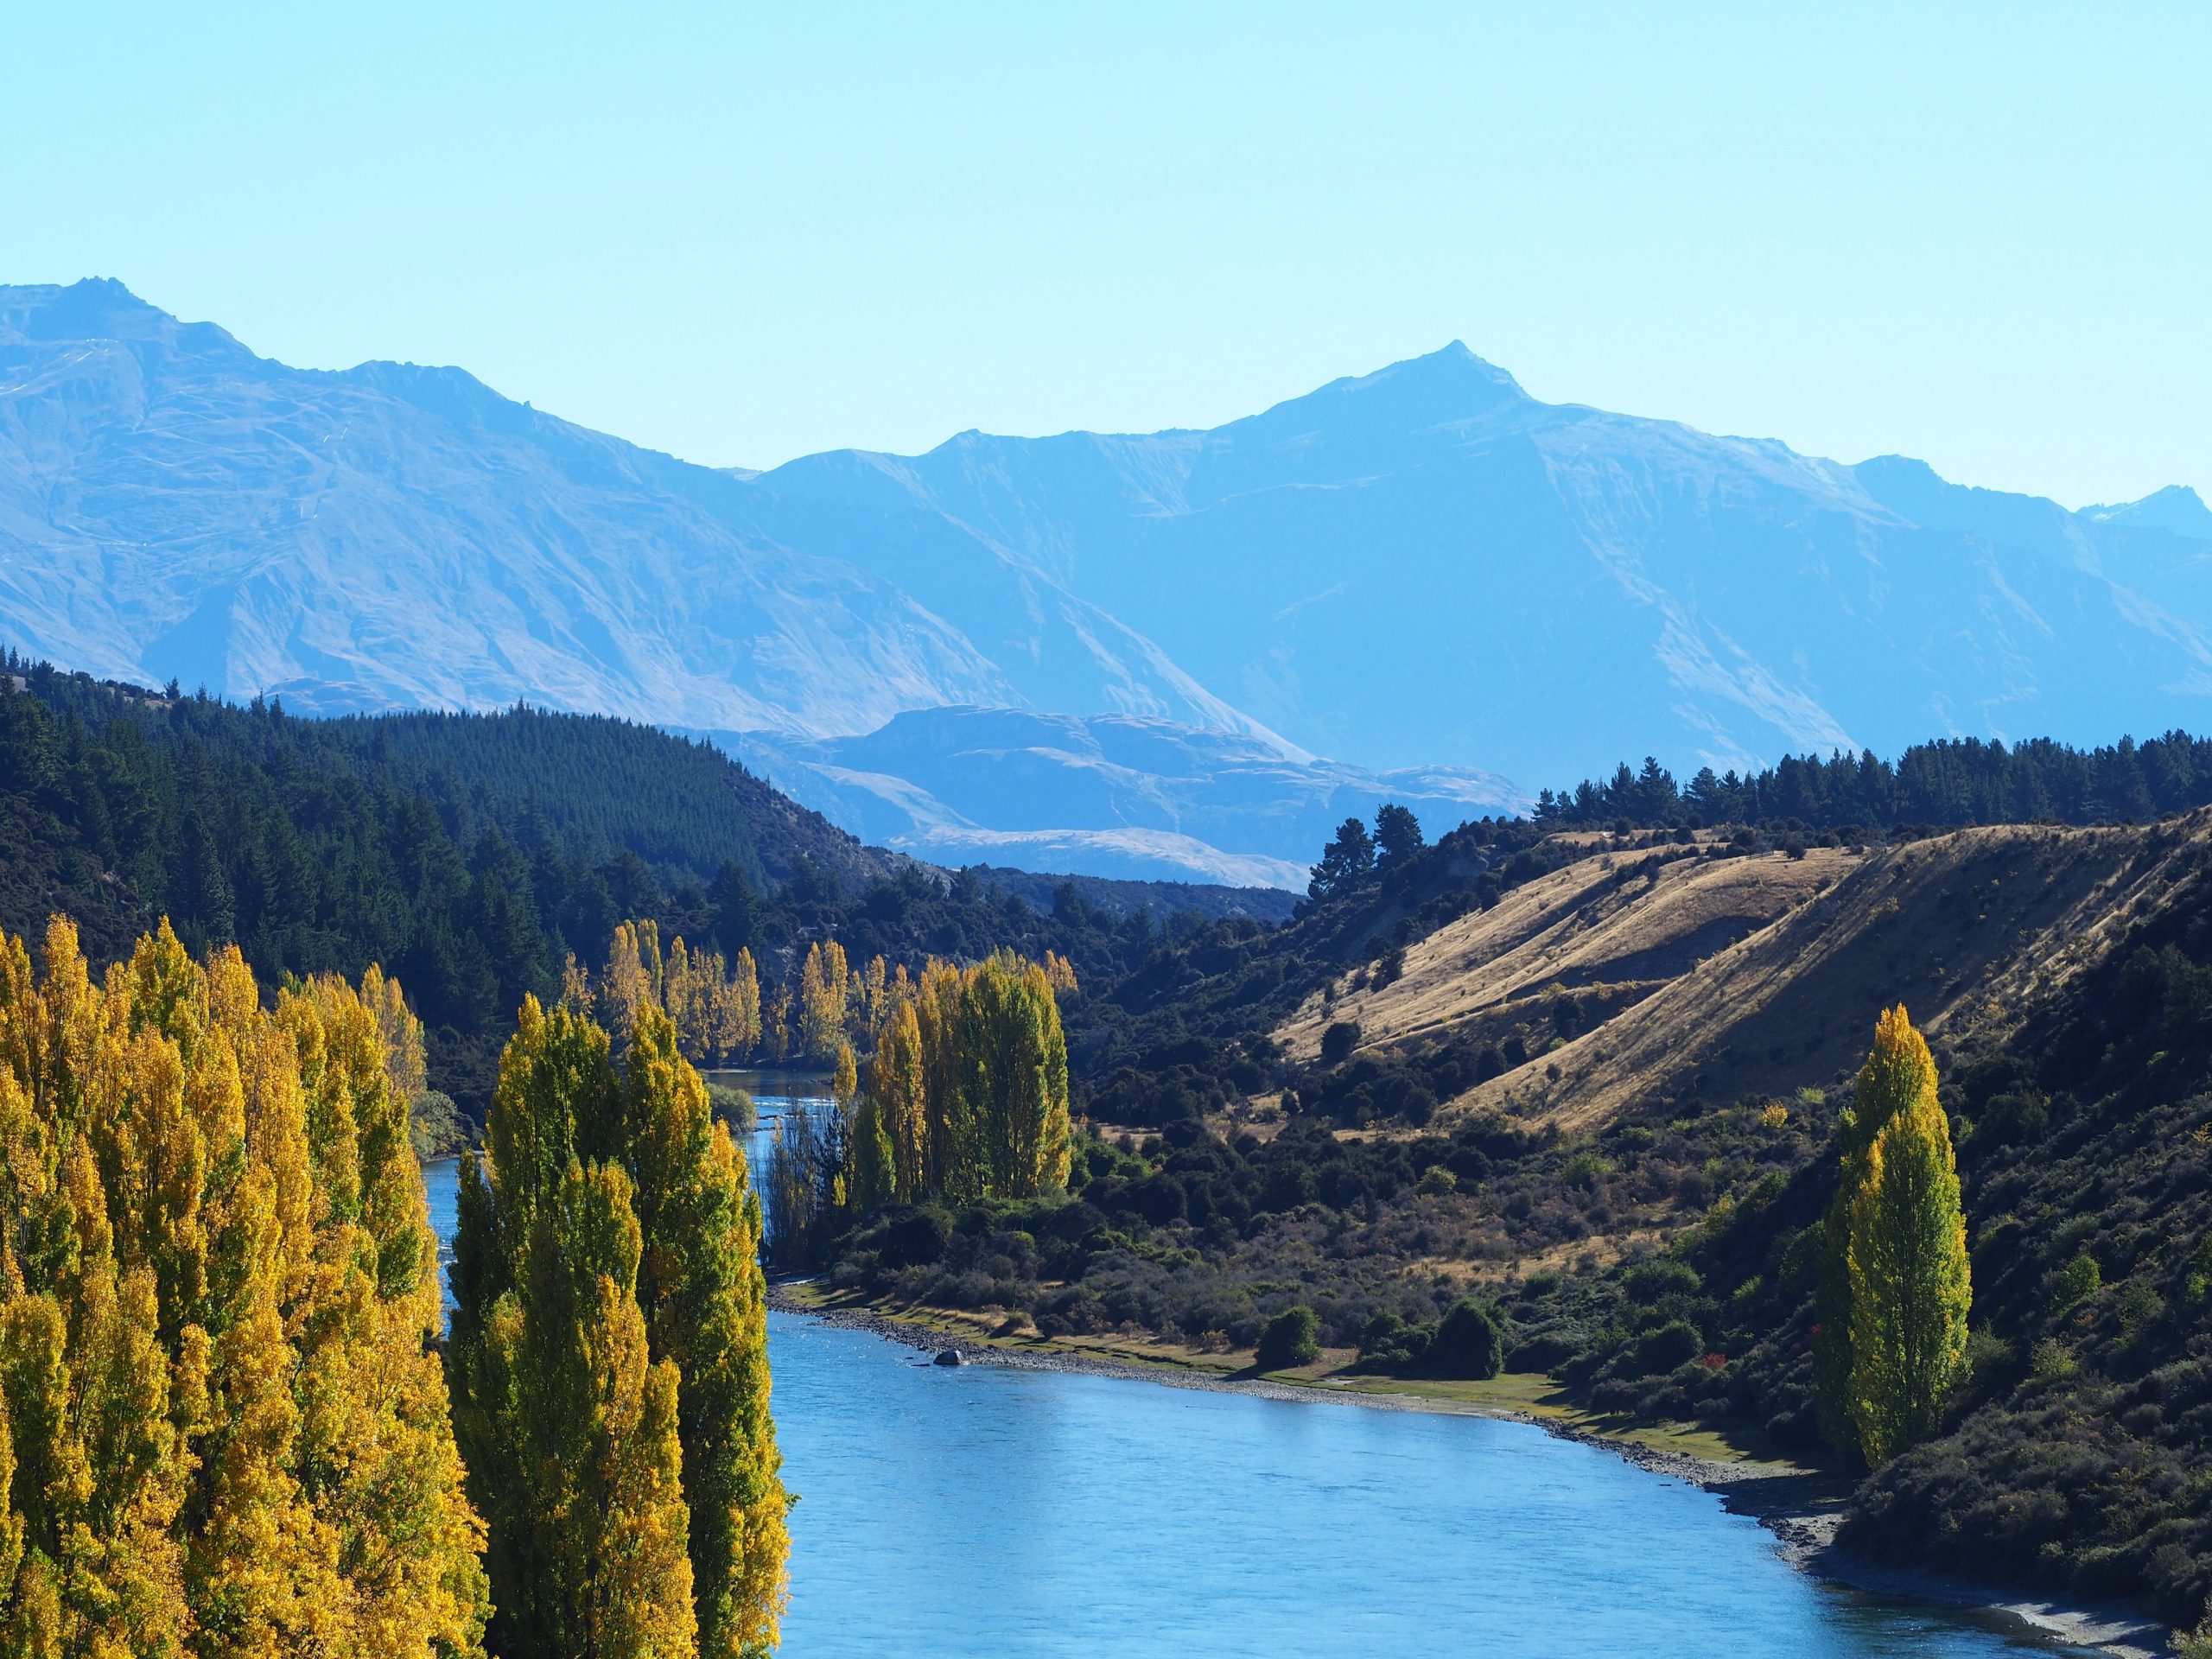 A river running between tree-lined riverbanks with mountains in the backdrop.